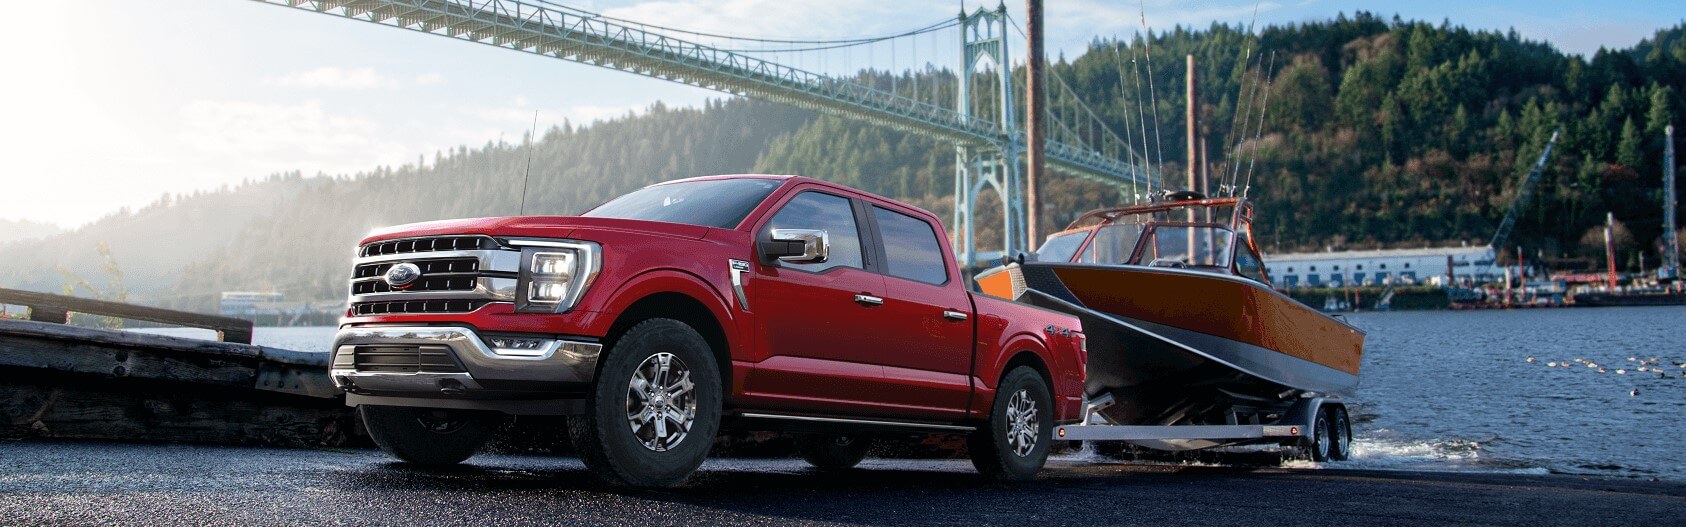 2021 Ford F-150 Towing Capacity | Fred Beans Ford of Mechanicsburg 2021 Ford F 150 3.5 Towing Capacity